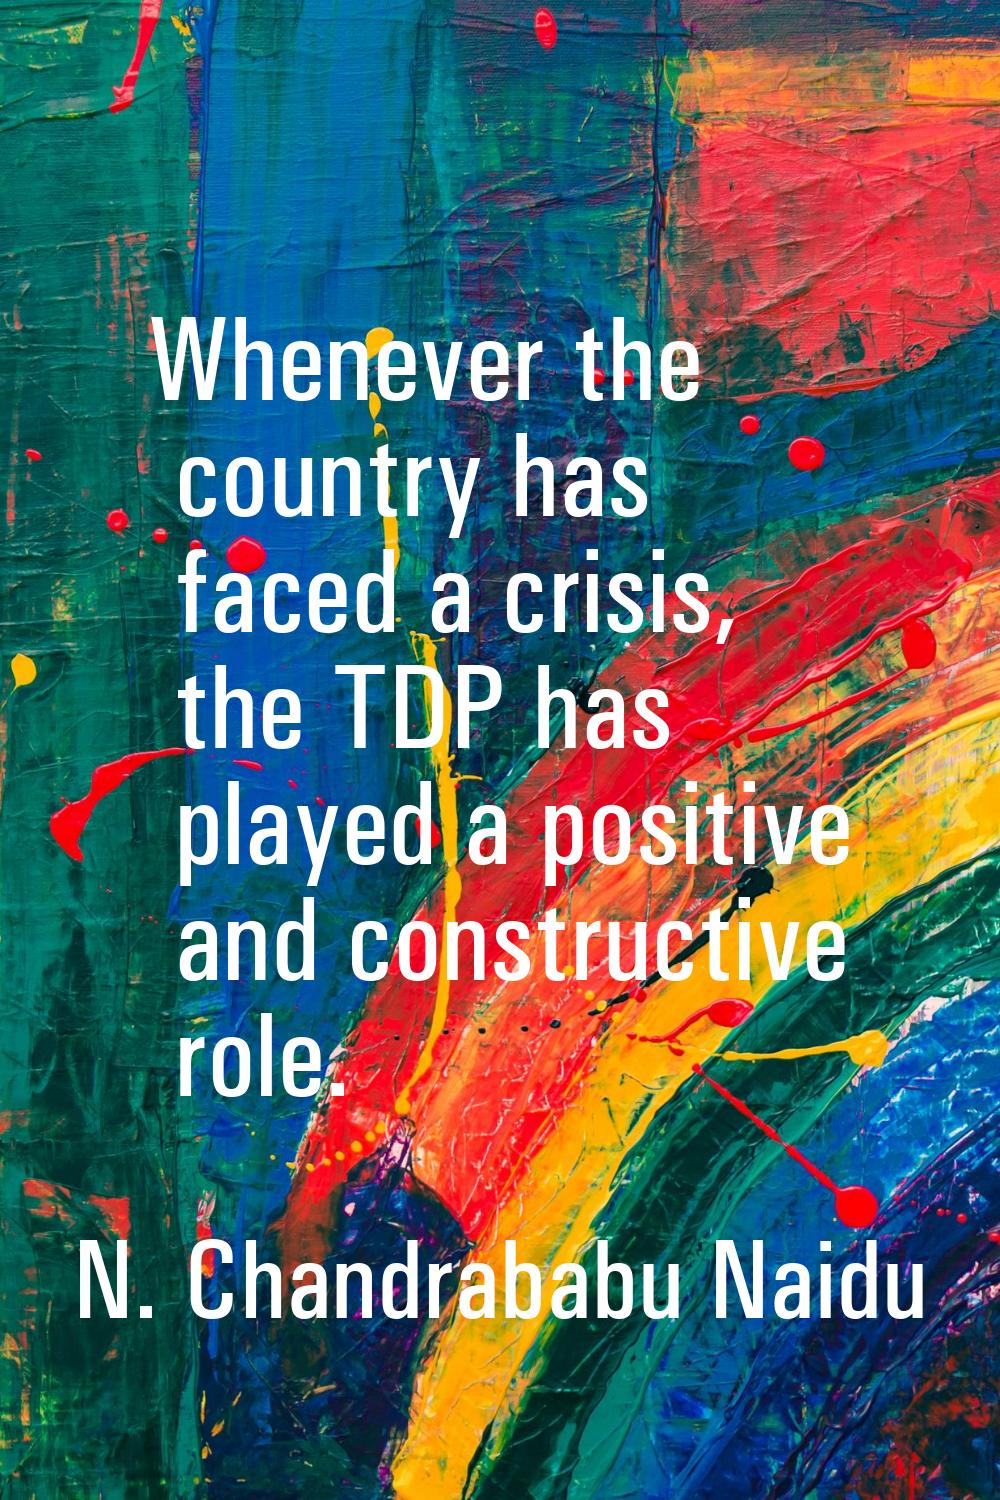 Whenever the country has faced a crisis, the TDP has played a positive and constructive role.